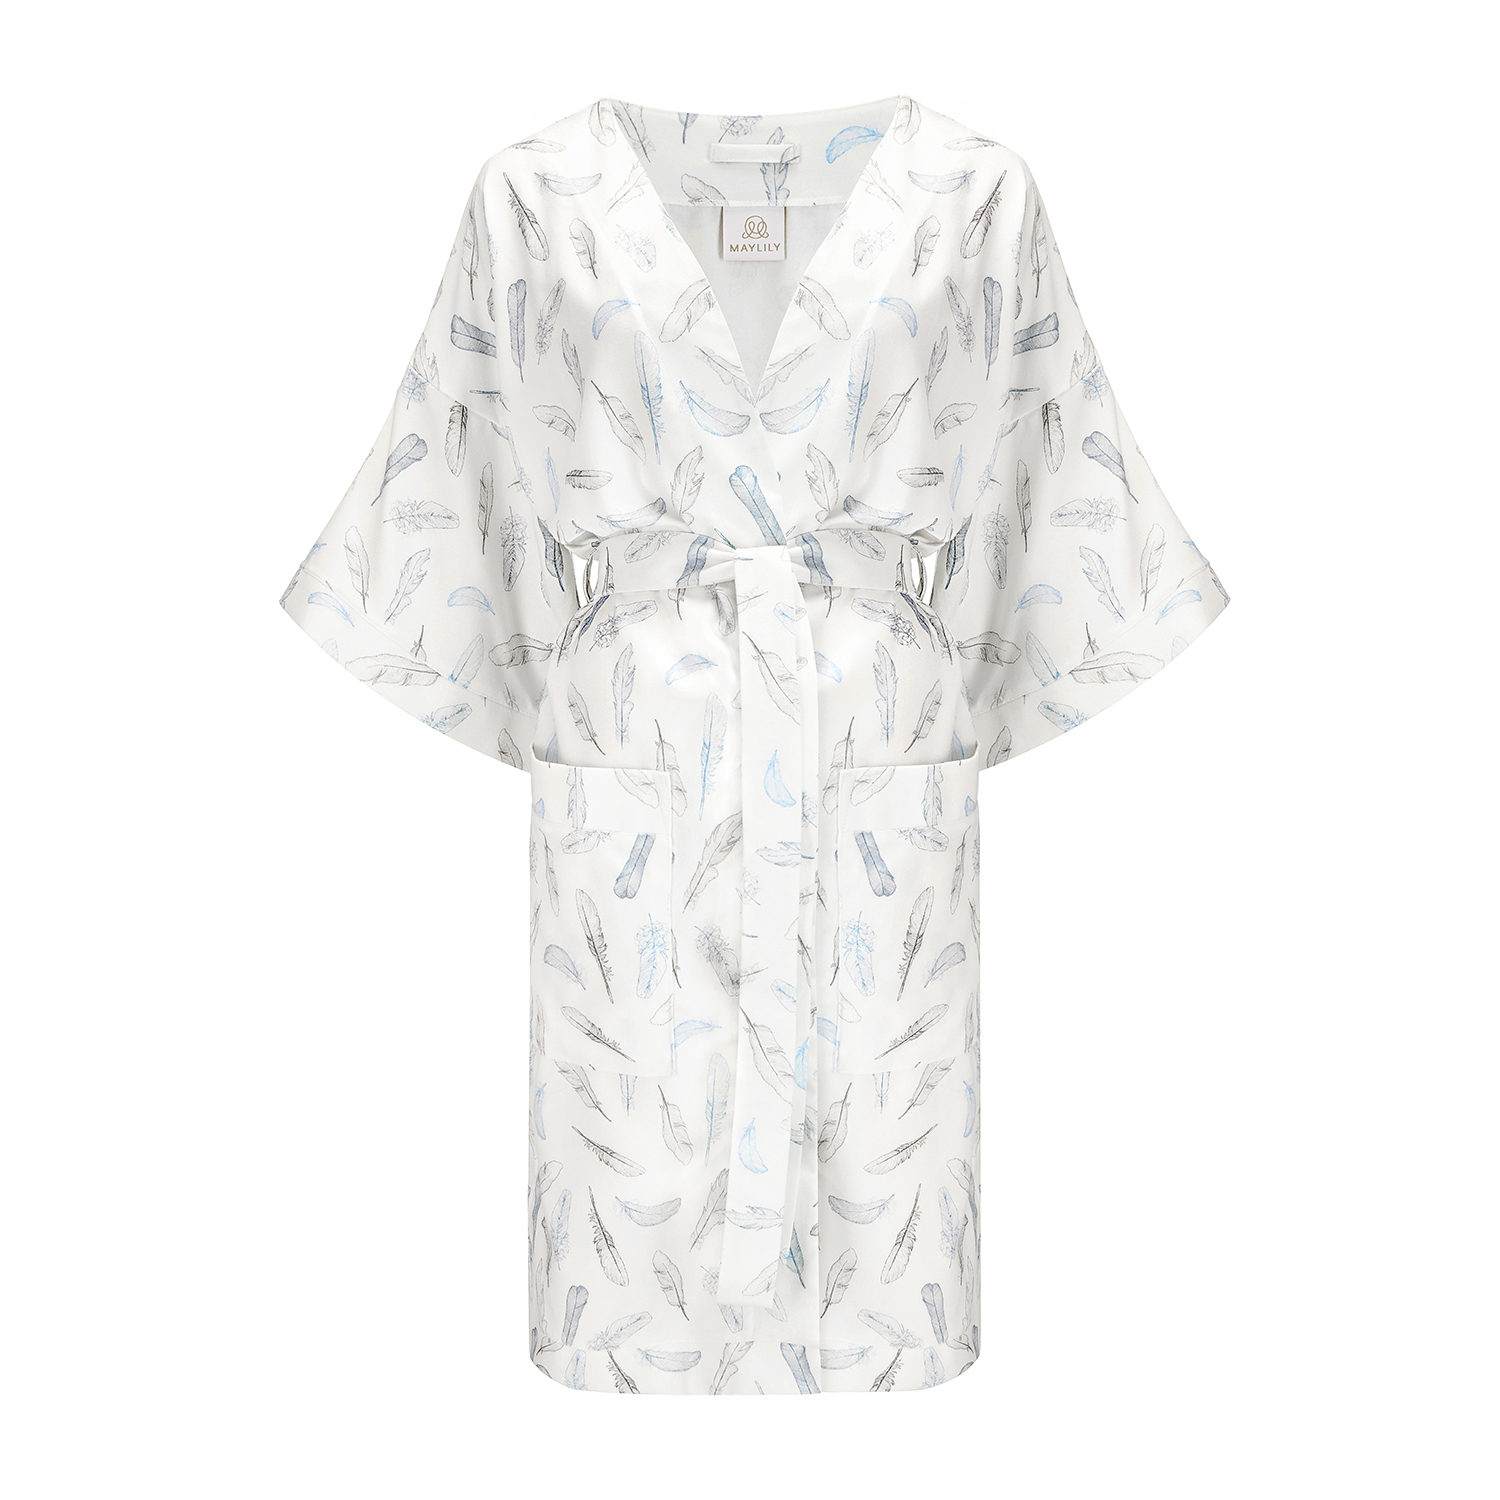 Bamboo kimono dressing gown - Heavenly feathers